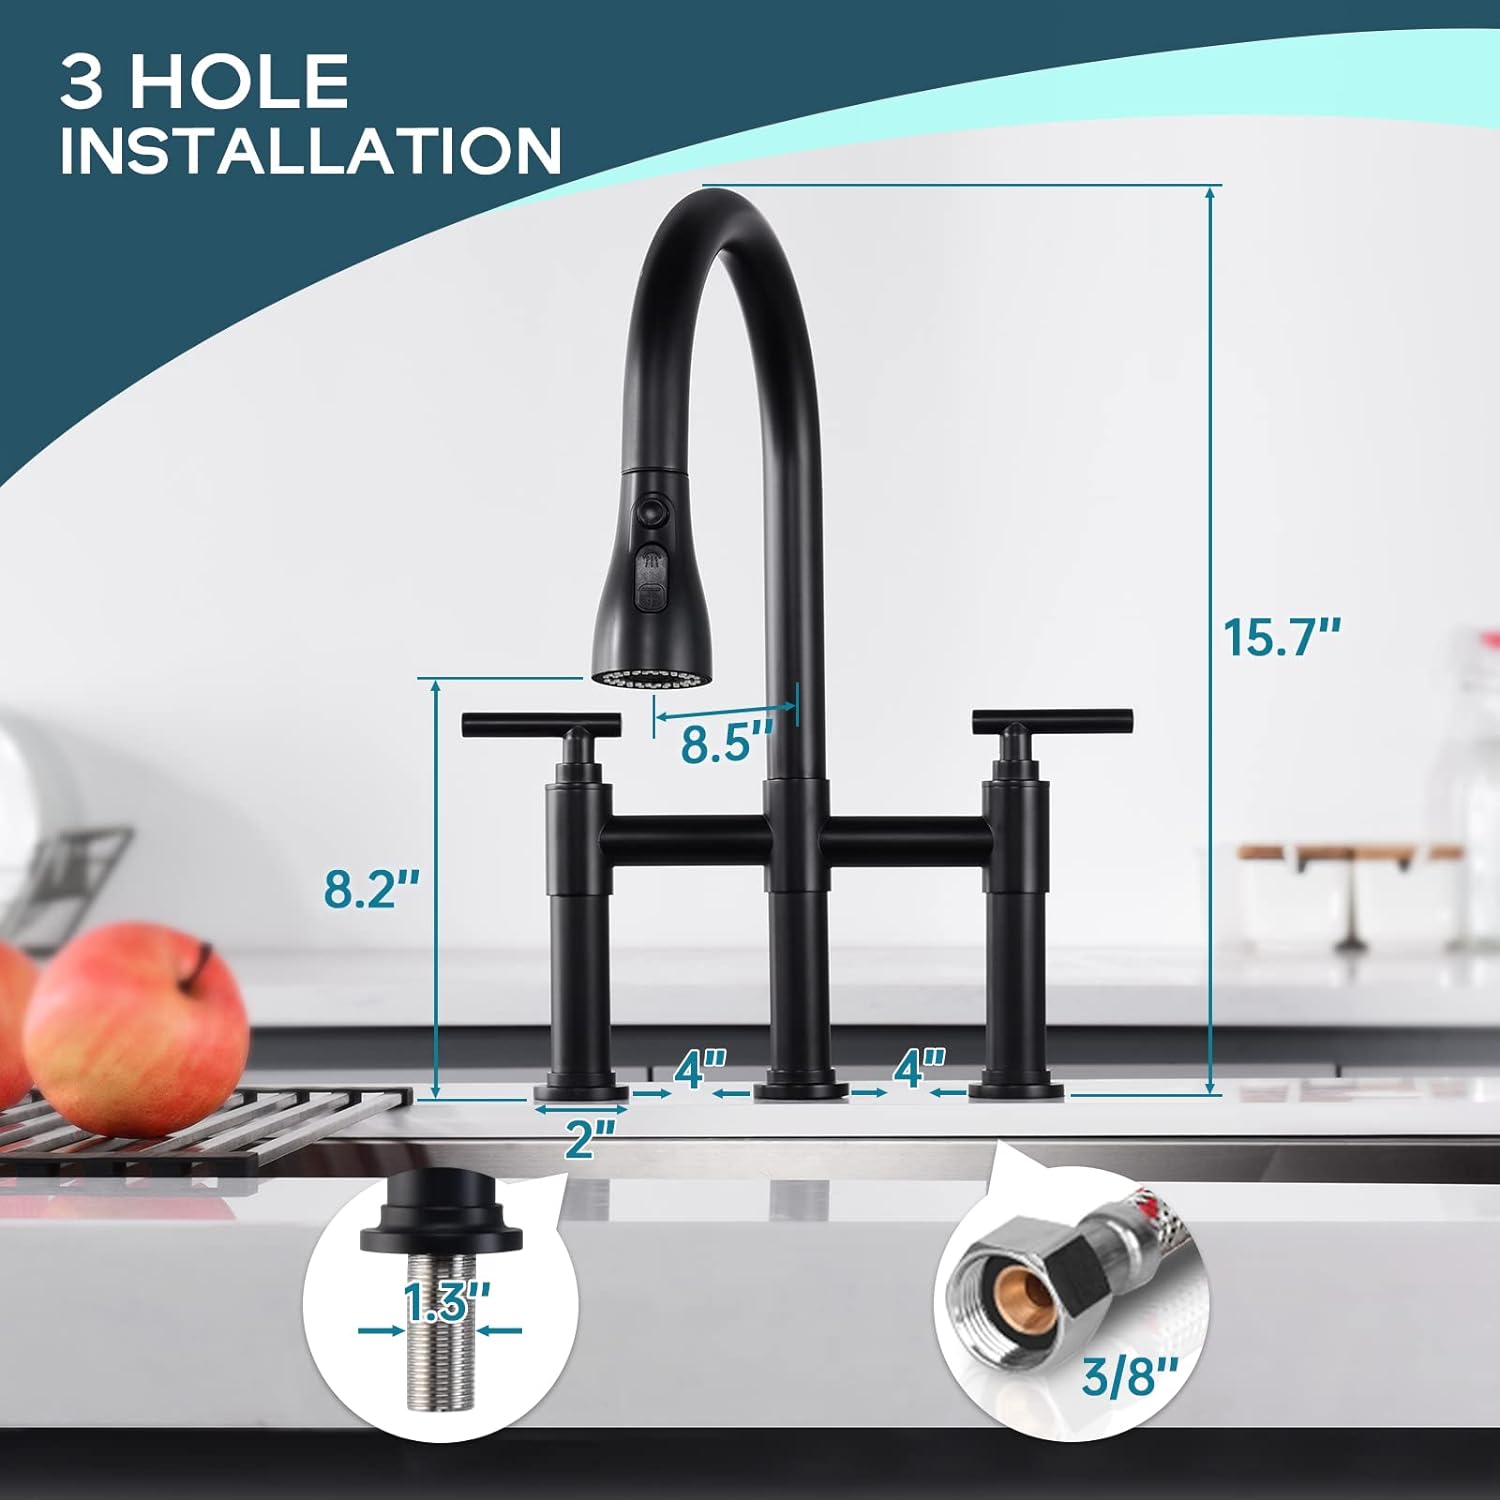 CF-15108 Kitchen Faucet with 3 Mode Pull-Down Sprayer 2 Handles 8 Inch Kitchen Sink Faucet 3 Hole Kitchen Sink Faucet Fingerprint Resistant Stain Resistant Stainless Steel-Arrisea